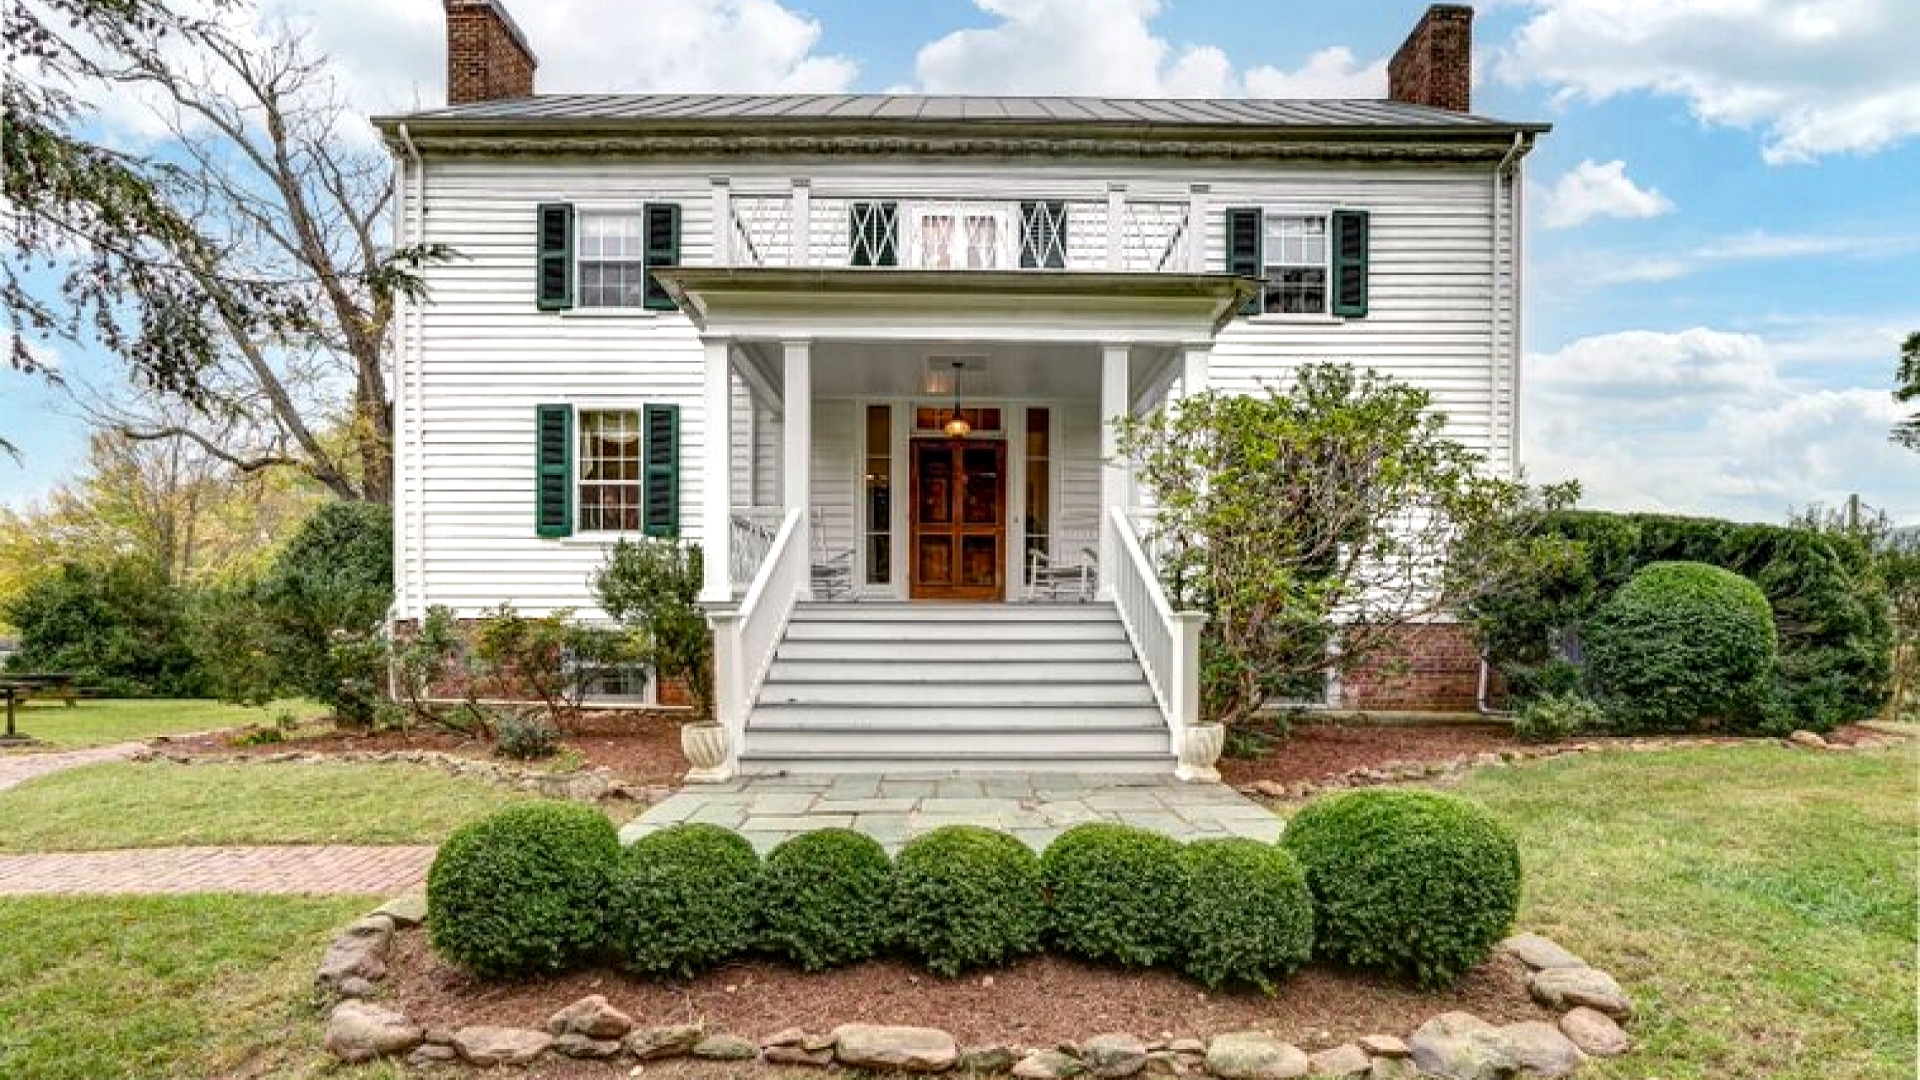  Nelson County VA Historic Home for Sale